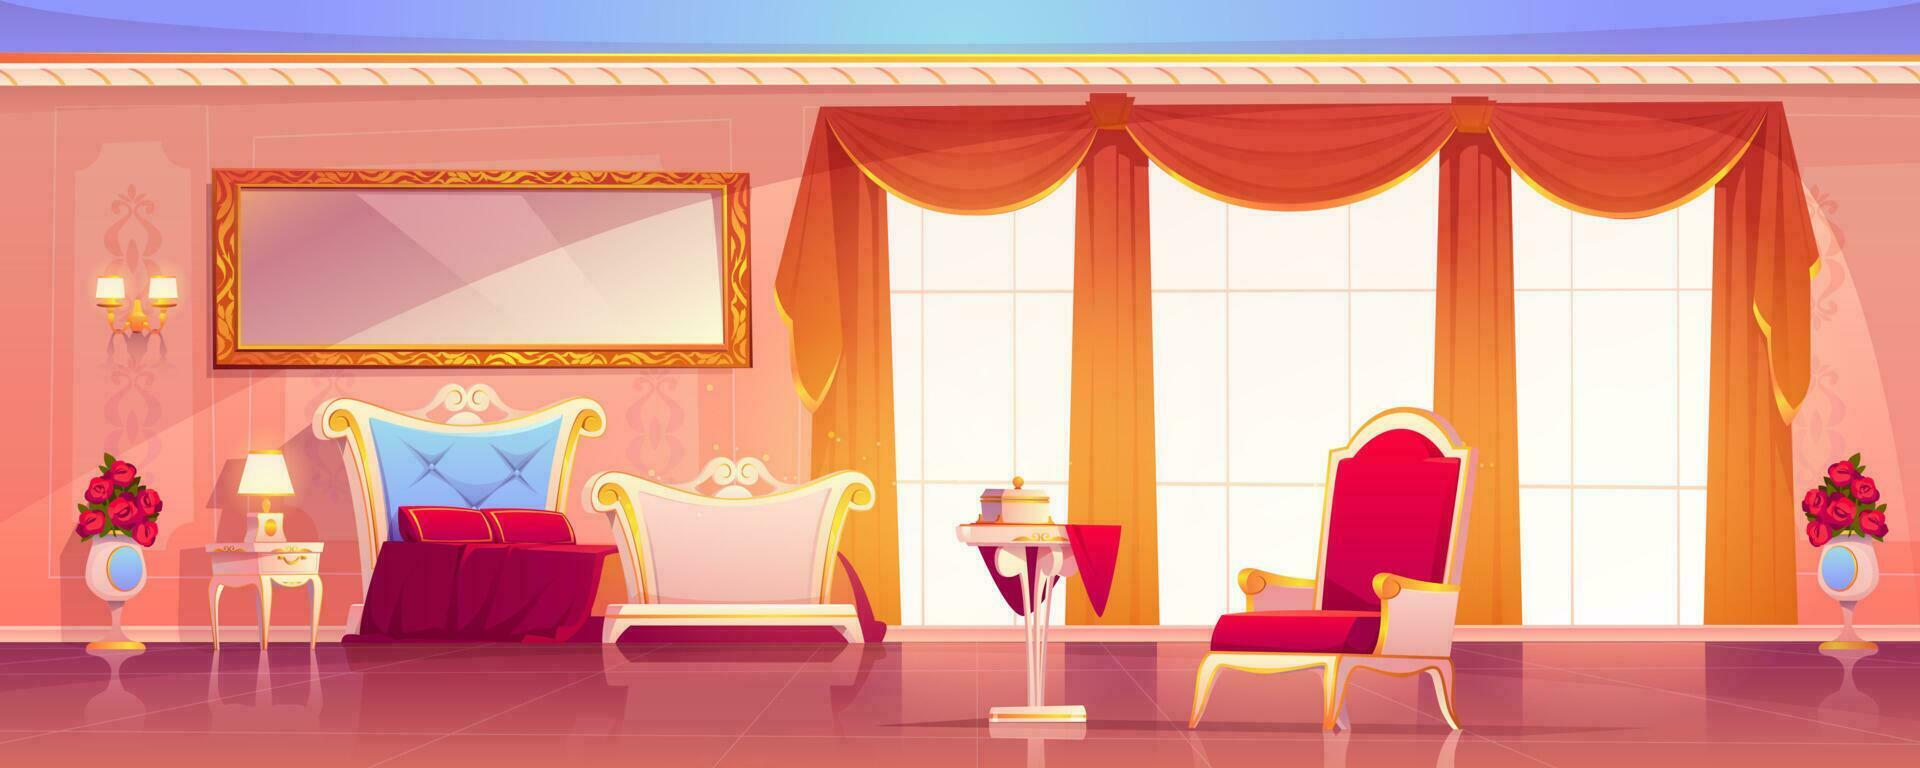 Palace room royal empty interior in empire style vector